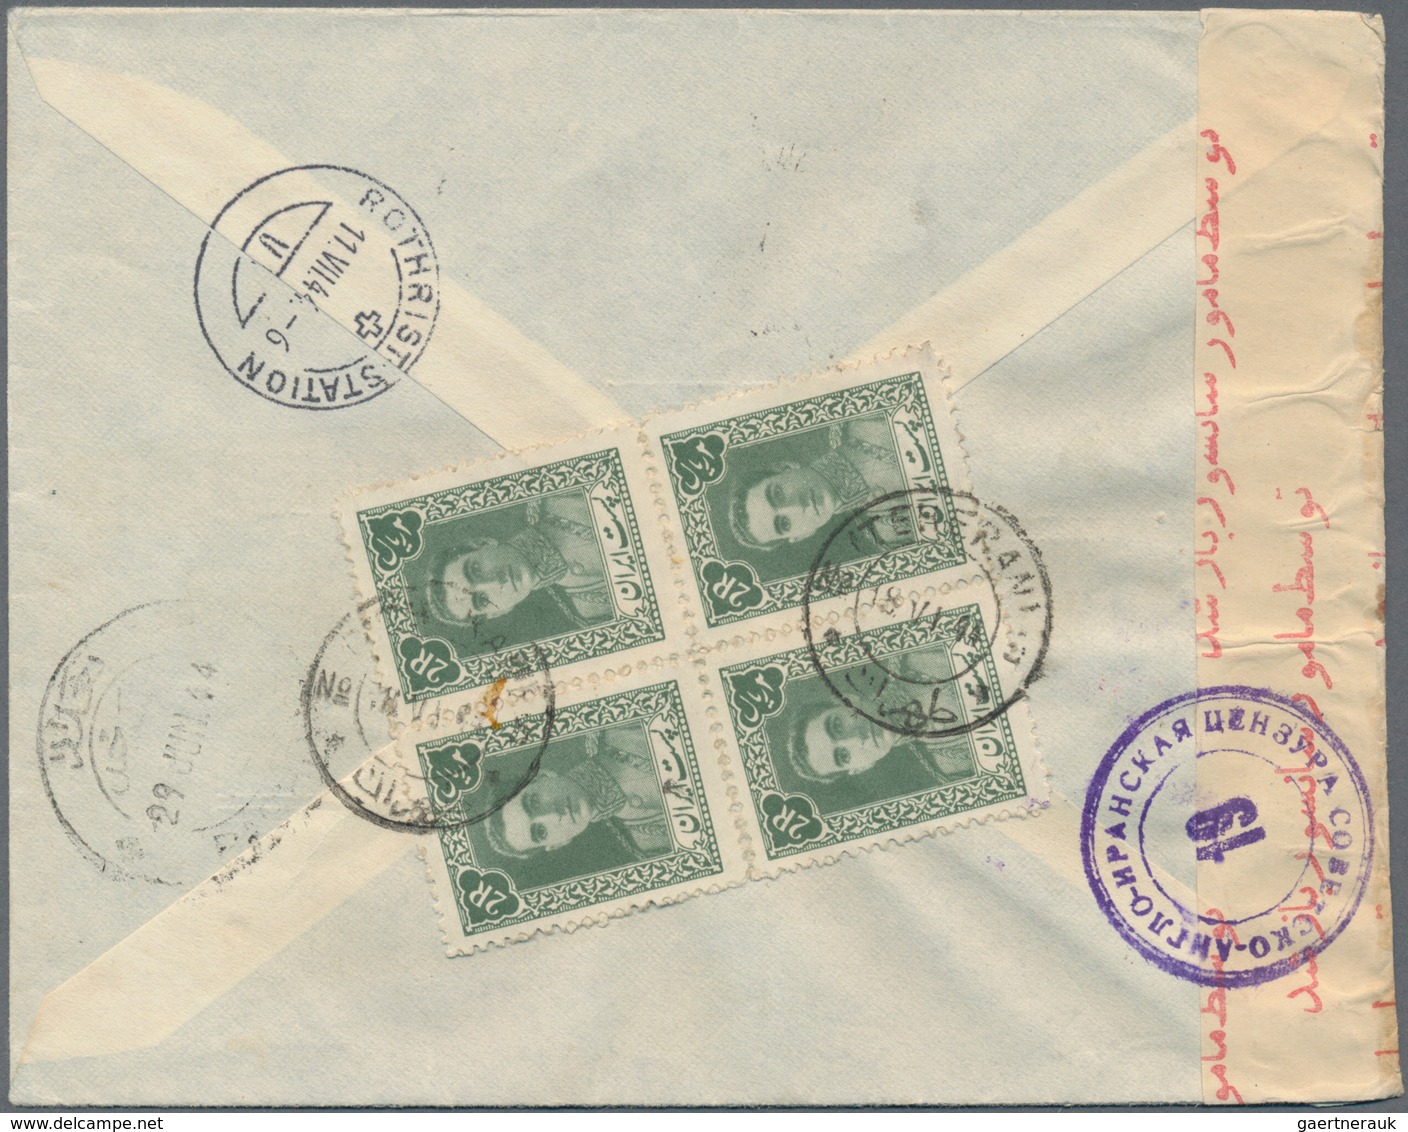 Iran: 1904/55, covers (32), stationery (1) inc. pre-1919 inland (11), 1942/45 anglo-russian censorsh